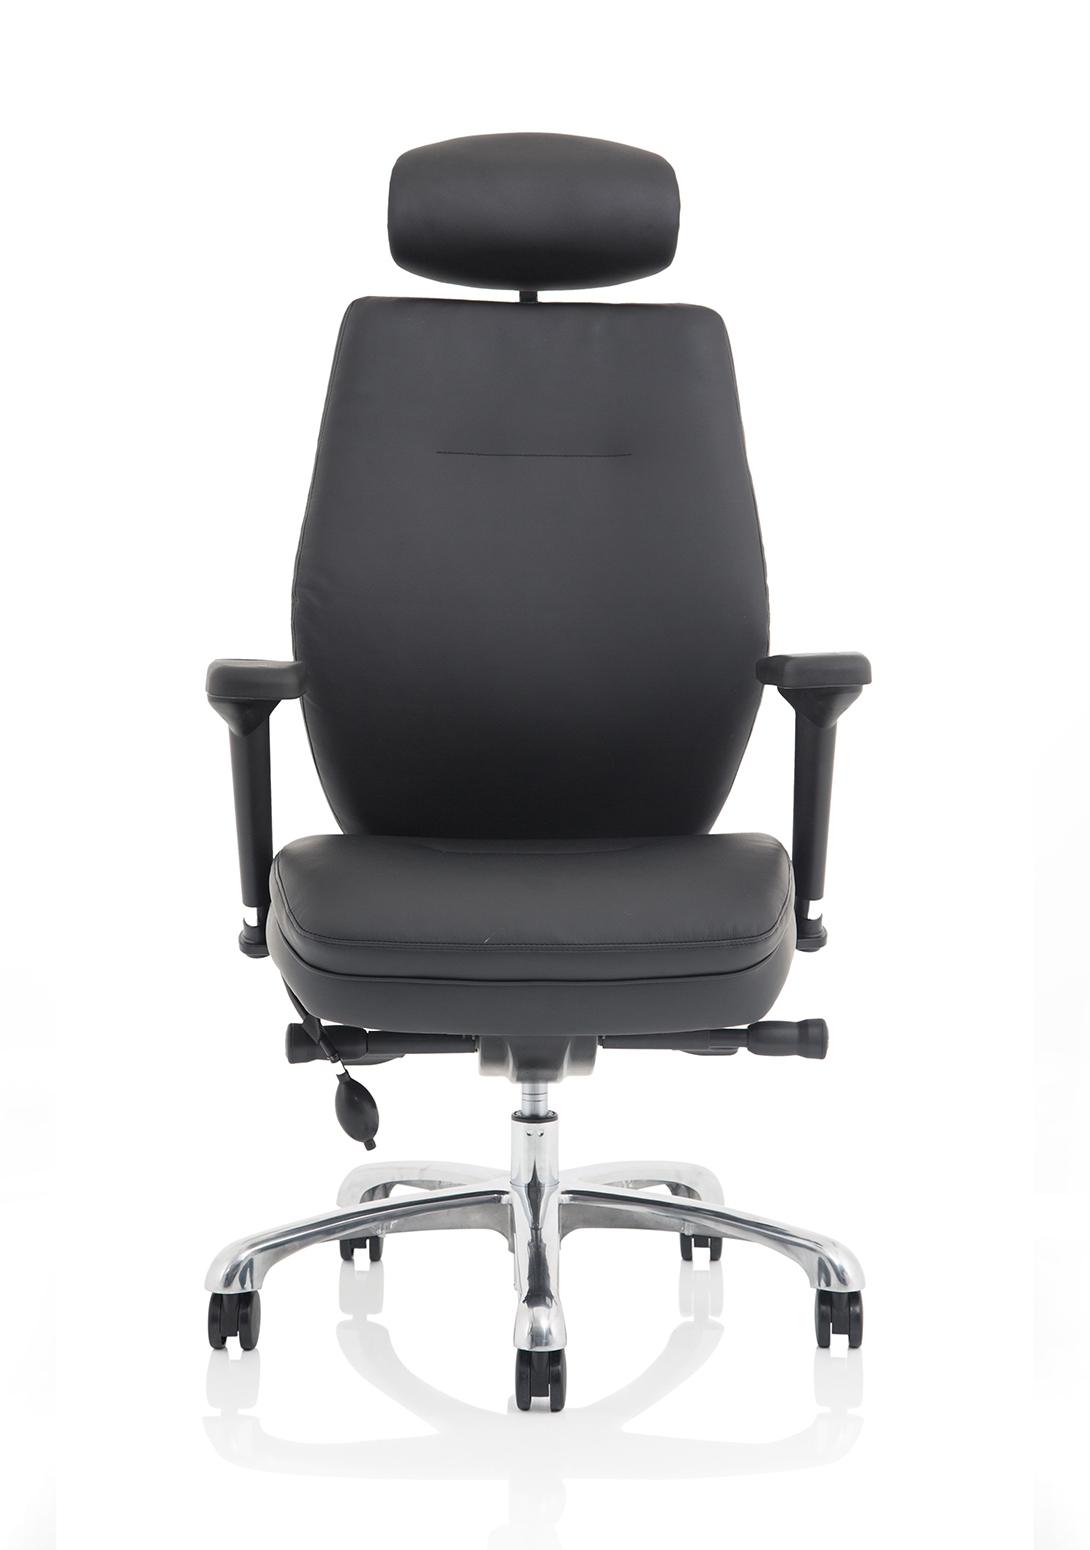 Domino High Back Black Posture Chair with Arms and Headrest